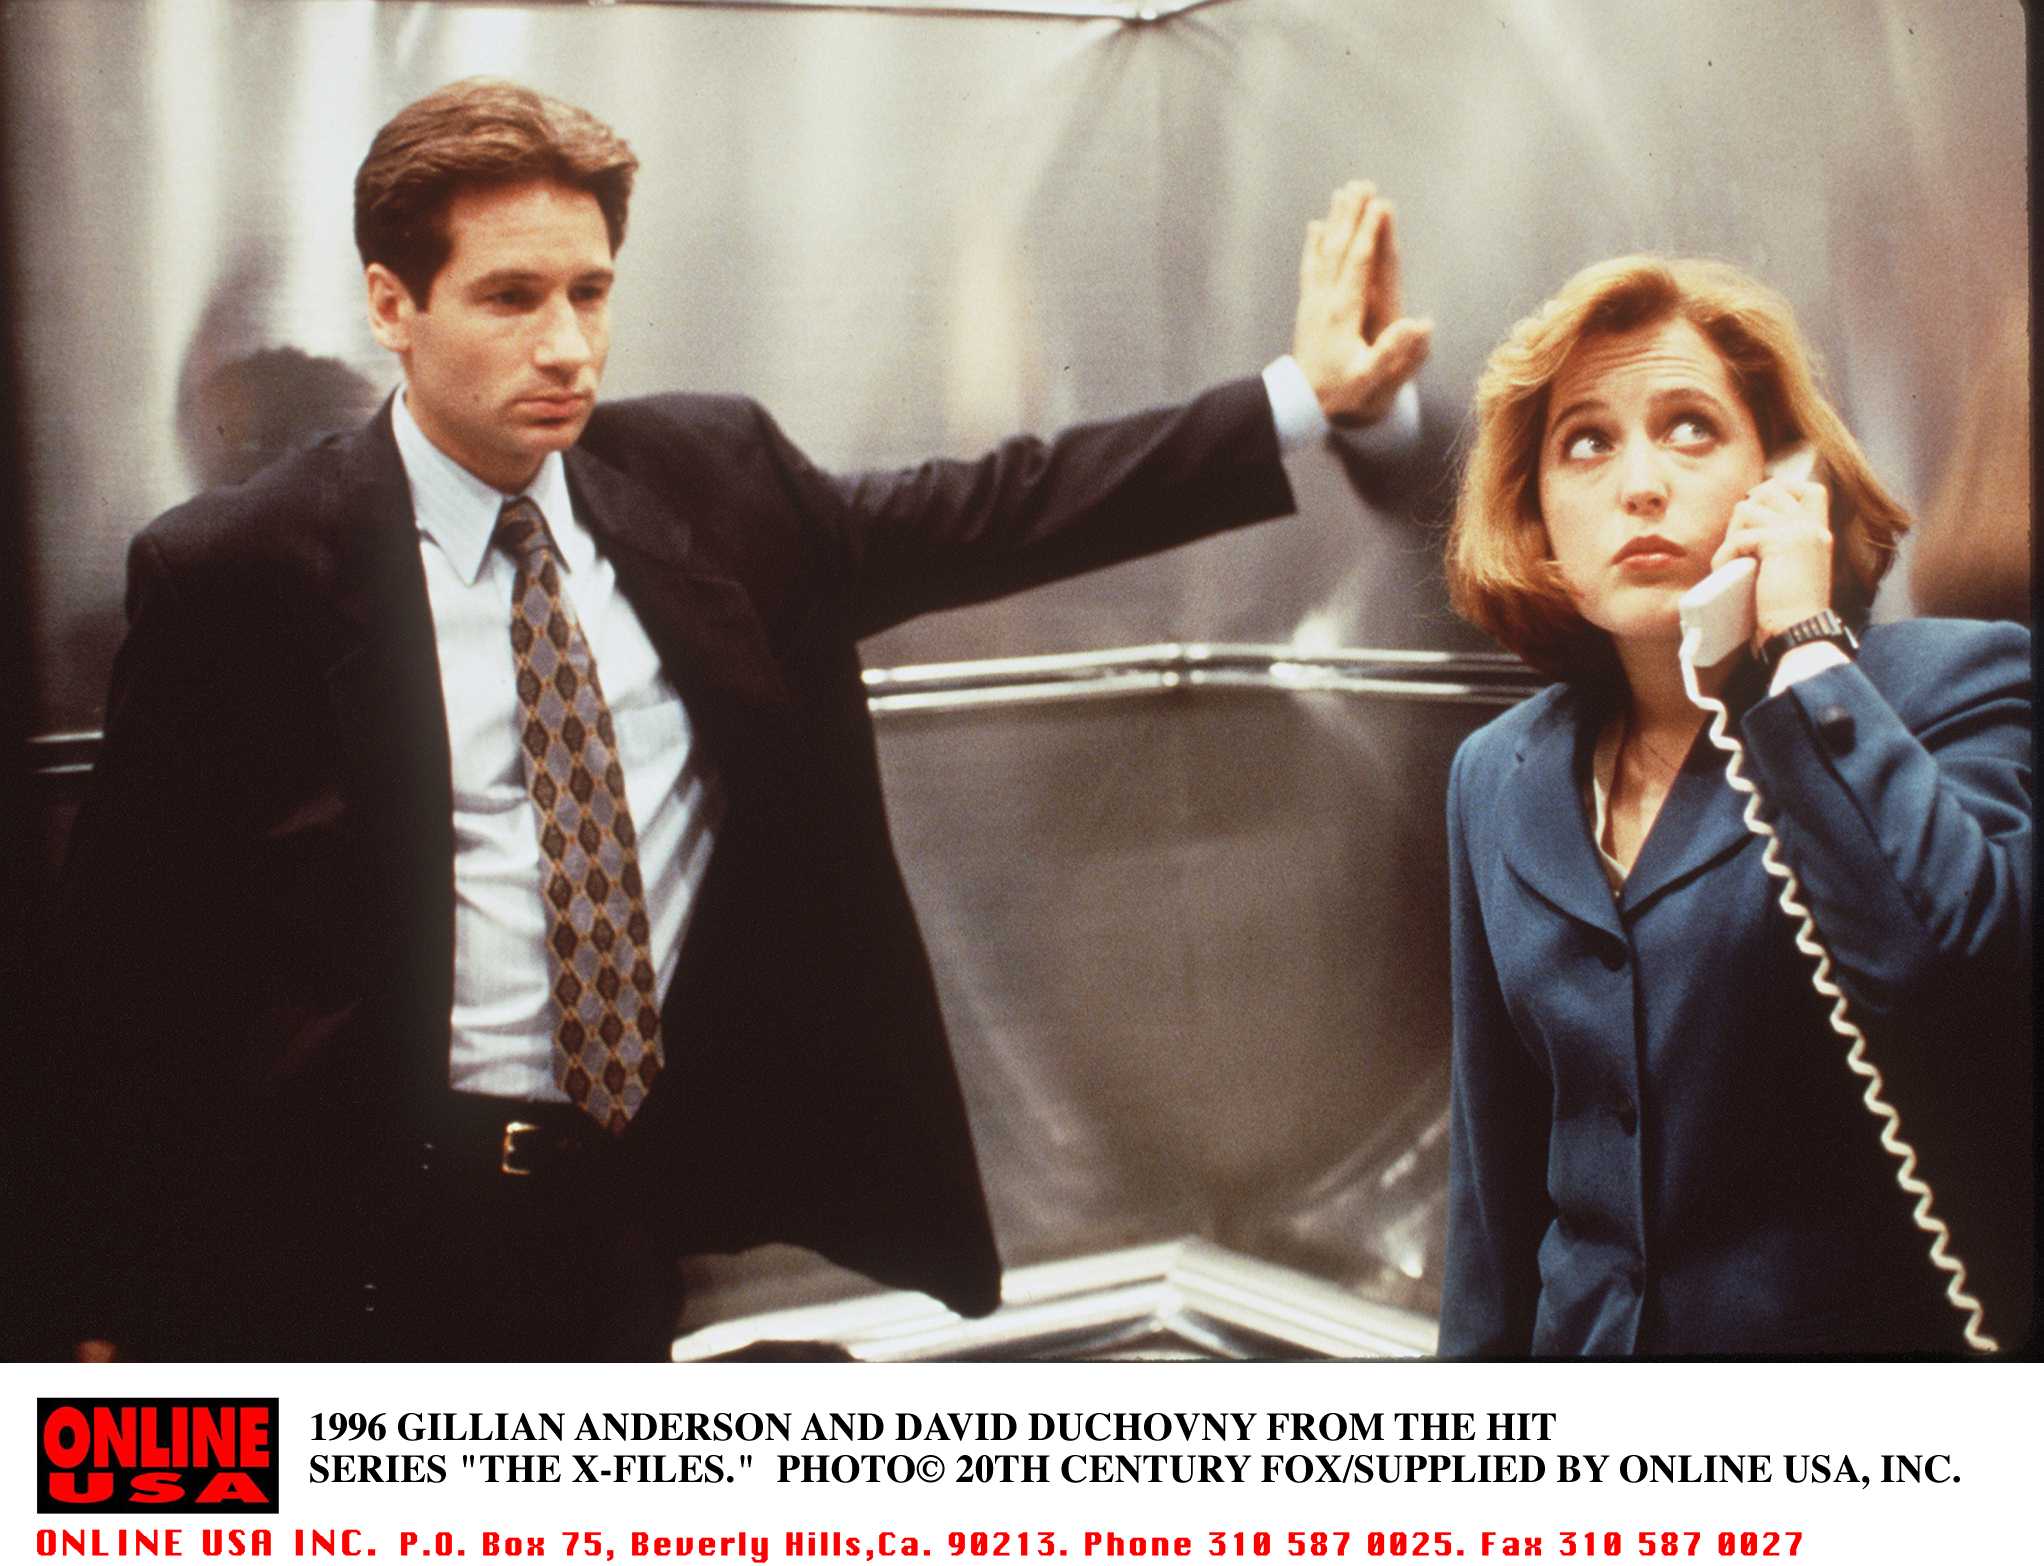 Gillian Anderson and David Duchovny of series 'X-FILES'